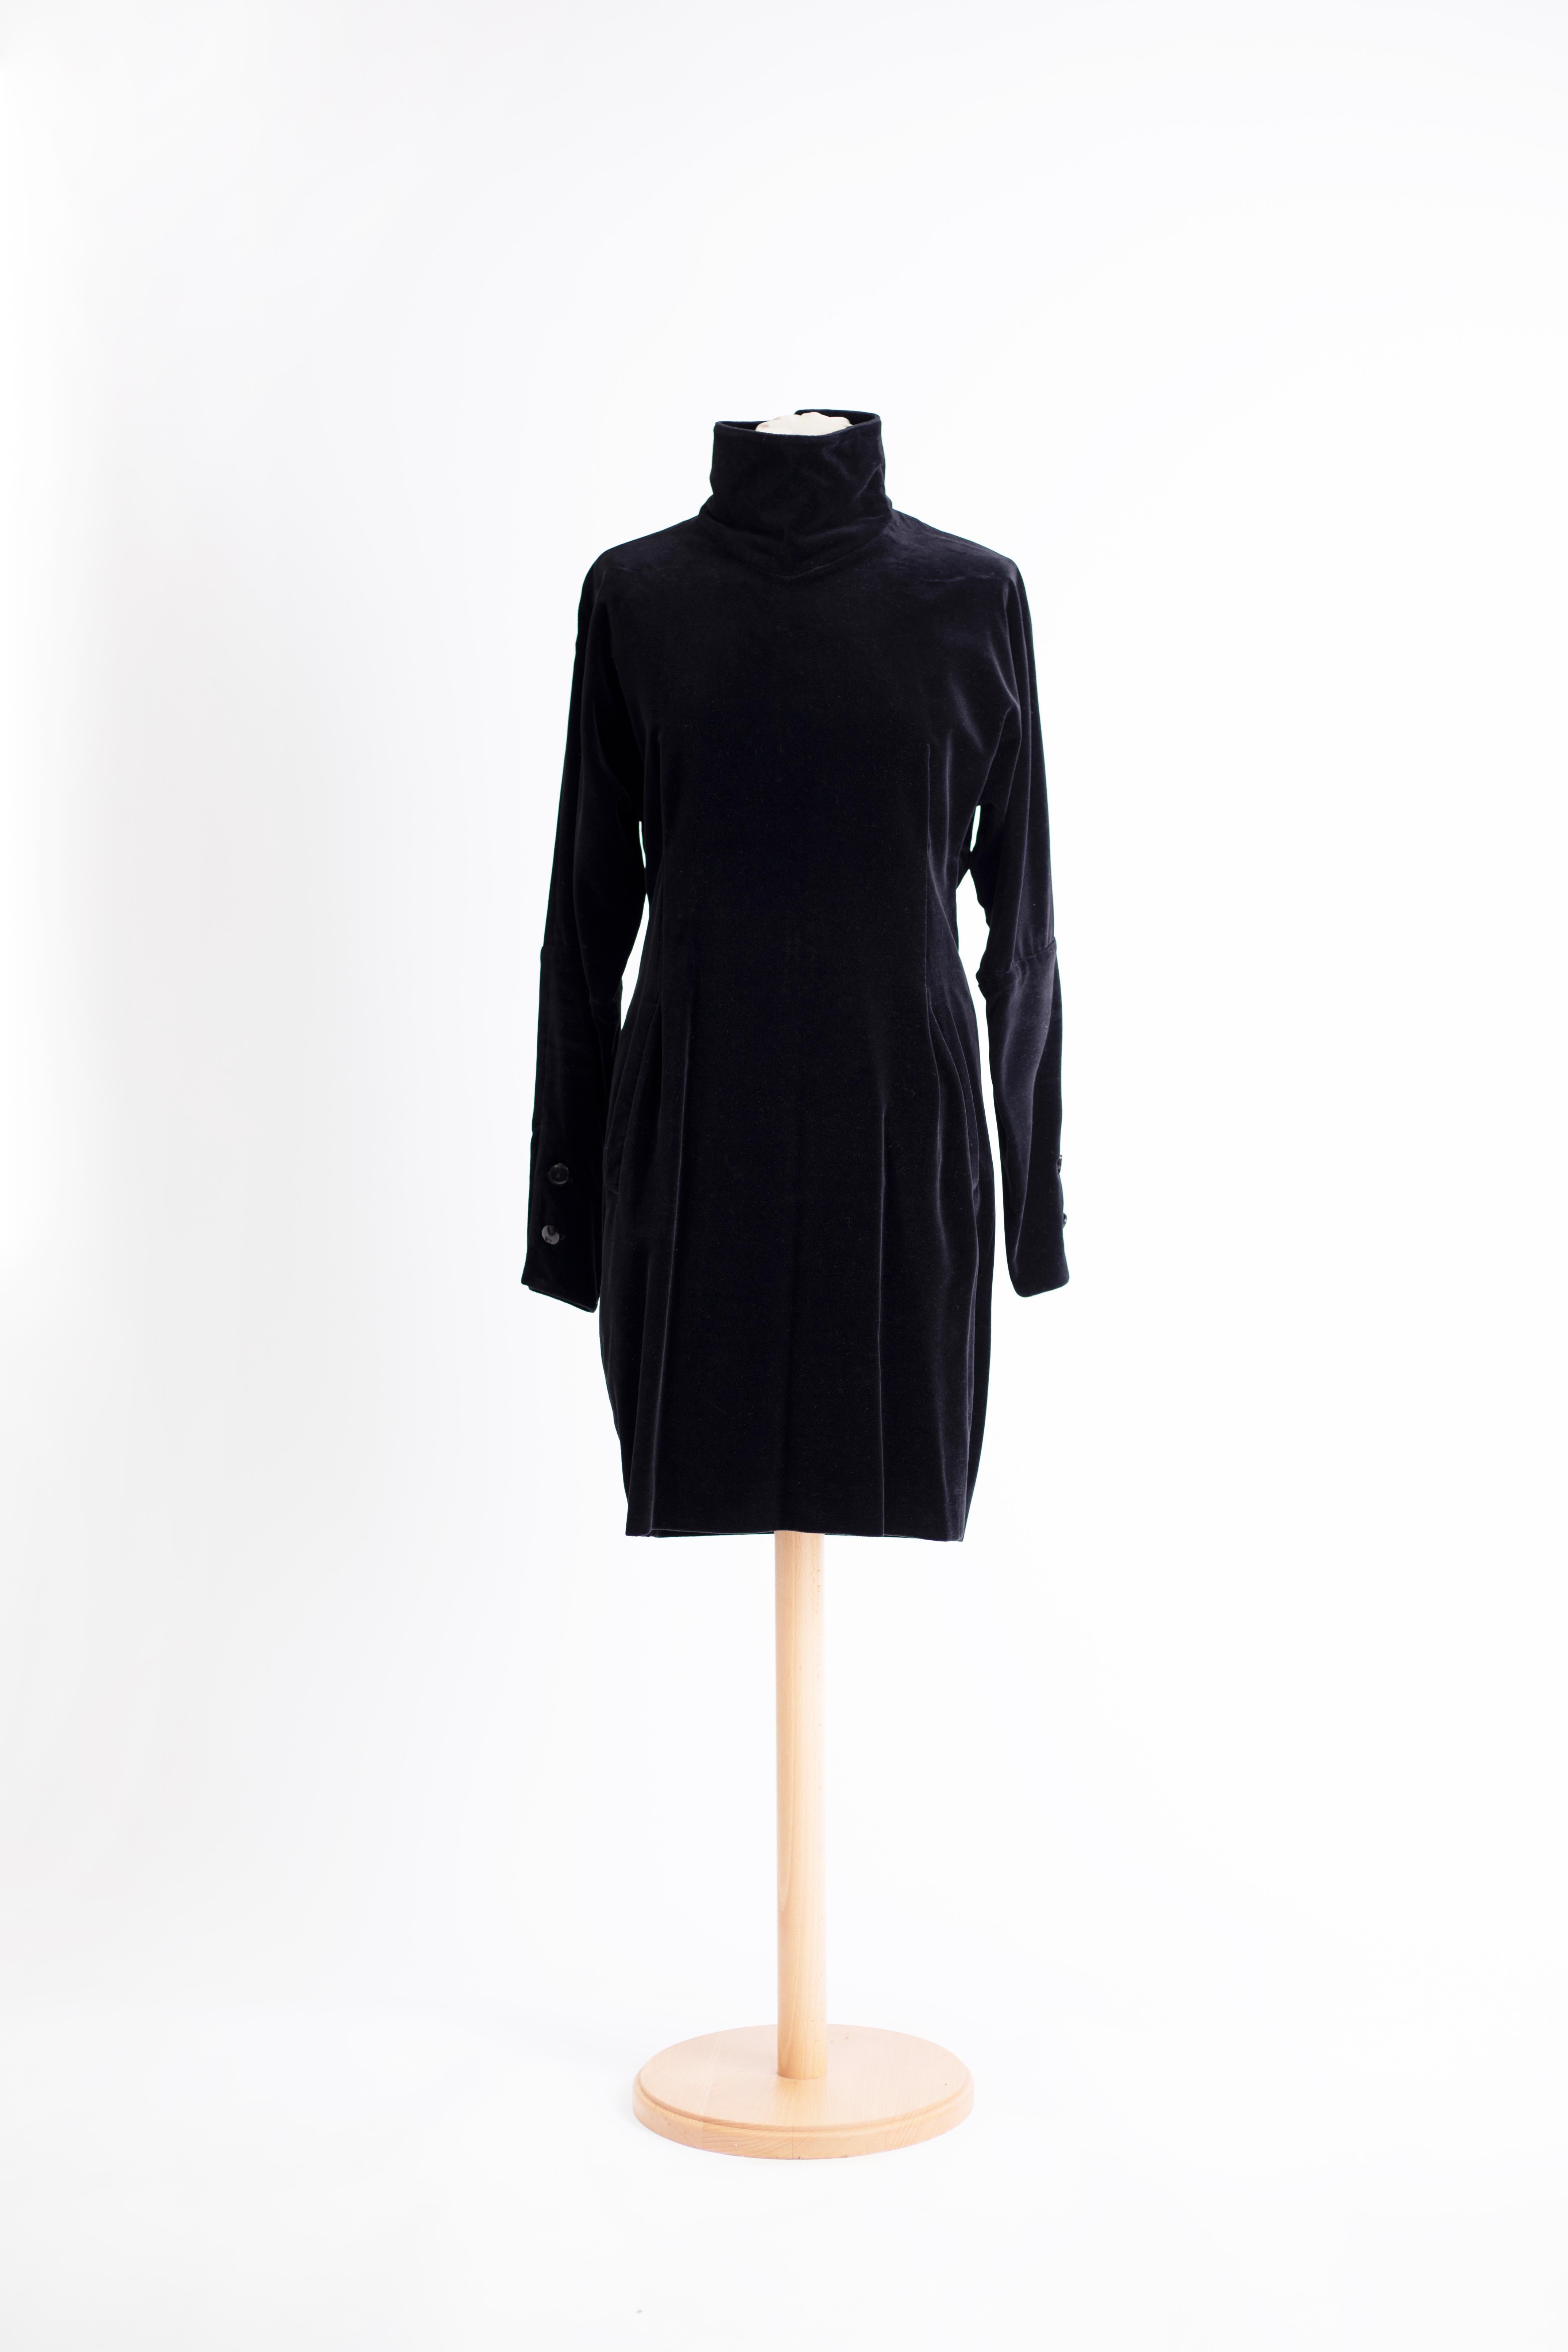 Black 1980s Zuccoli velvet dress with batwing style sleeves For Sale